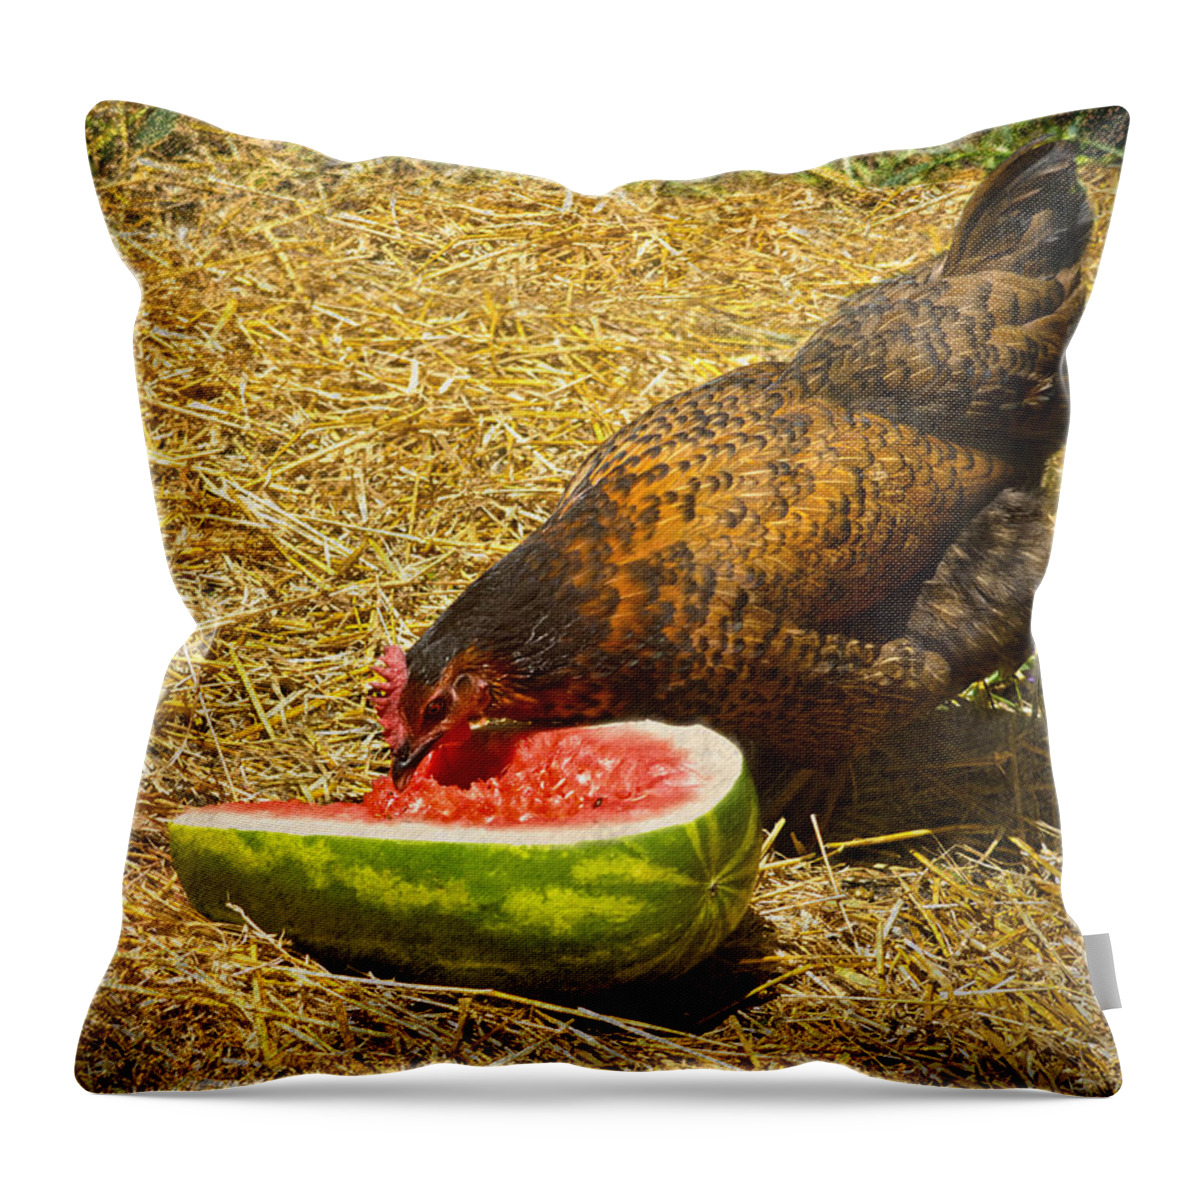 Mahogany Favorolle Chicken Throw Pillow featuring the photograph Chicken And Her Watermelon by Sandi OReilly